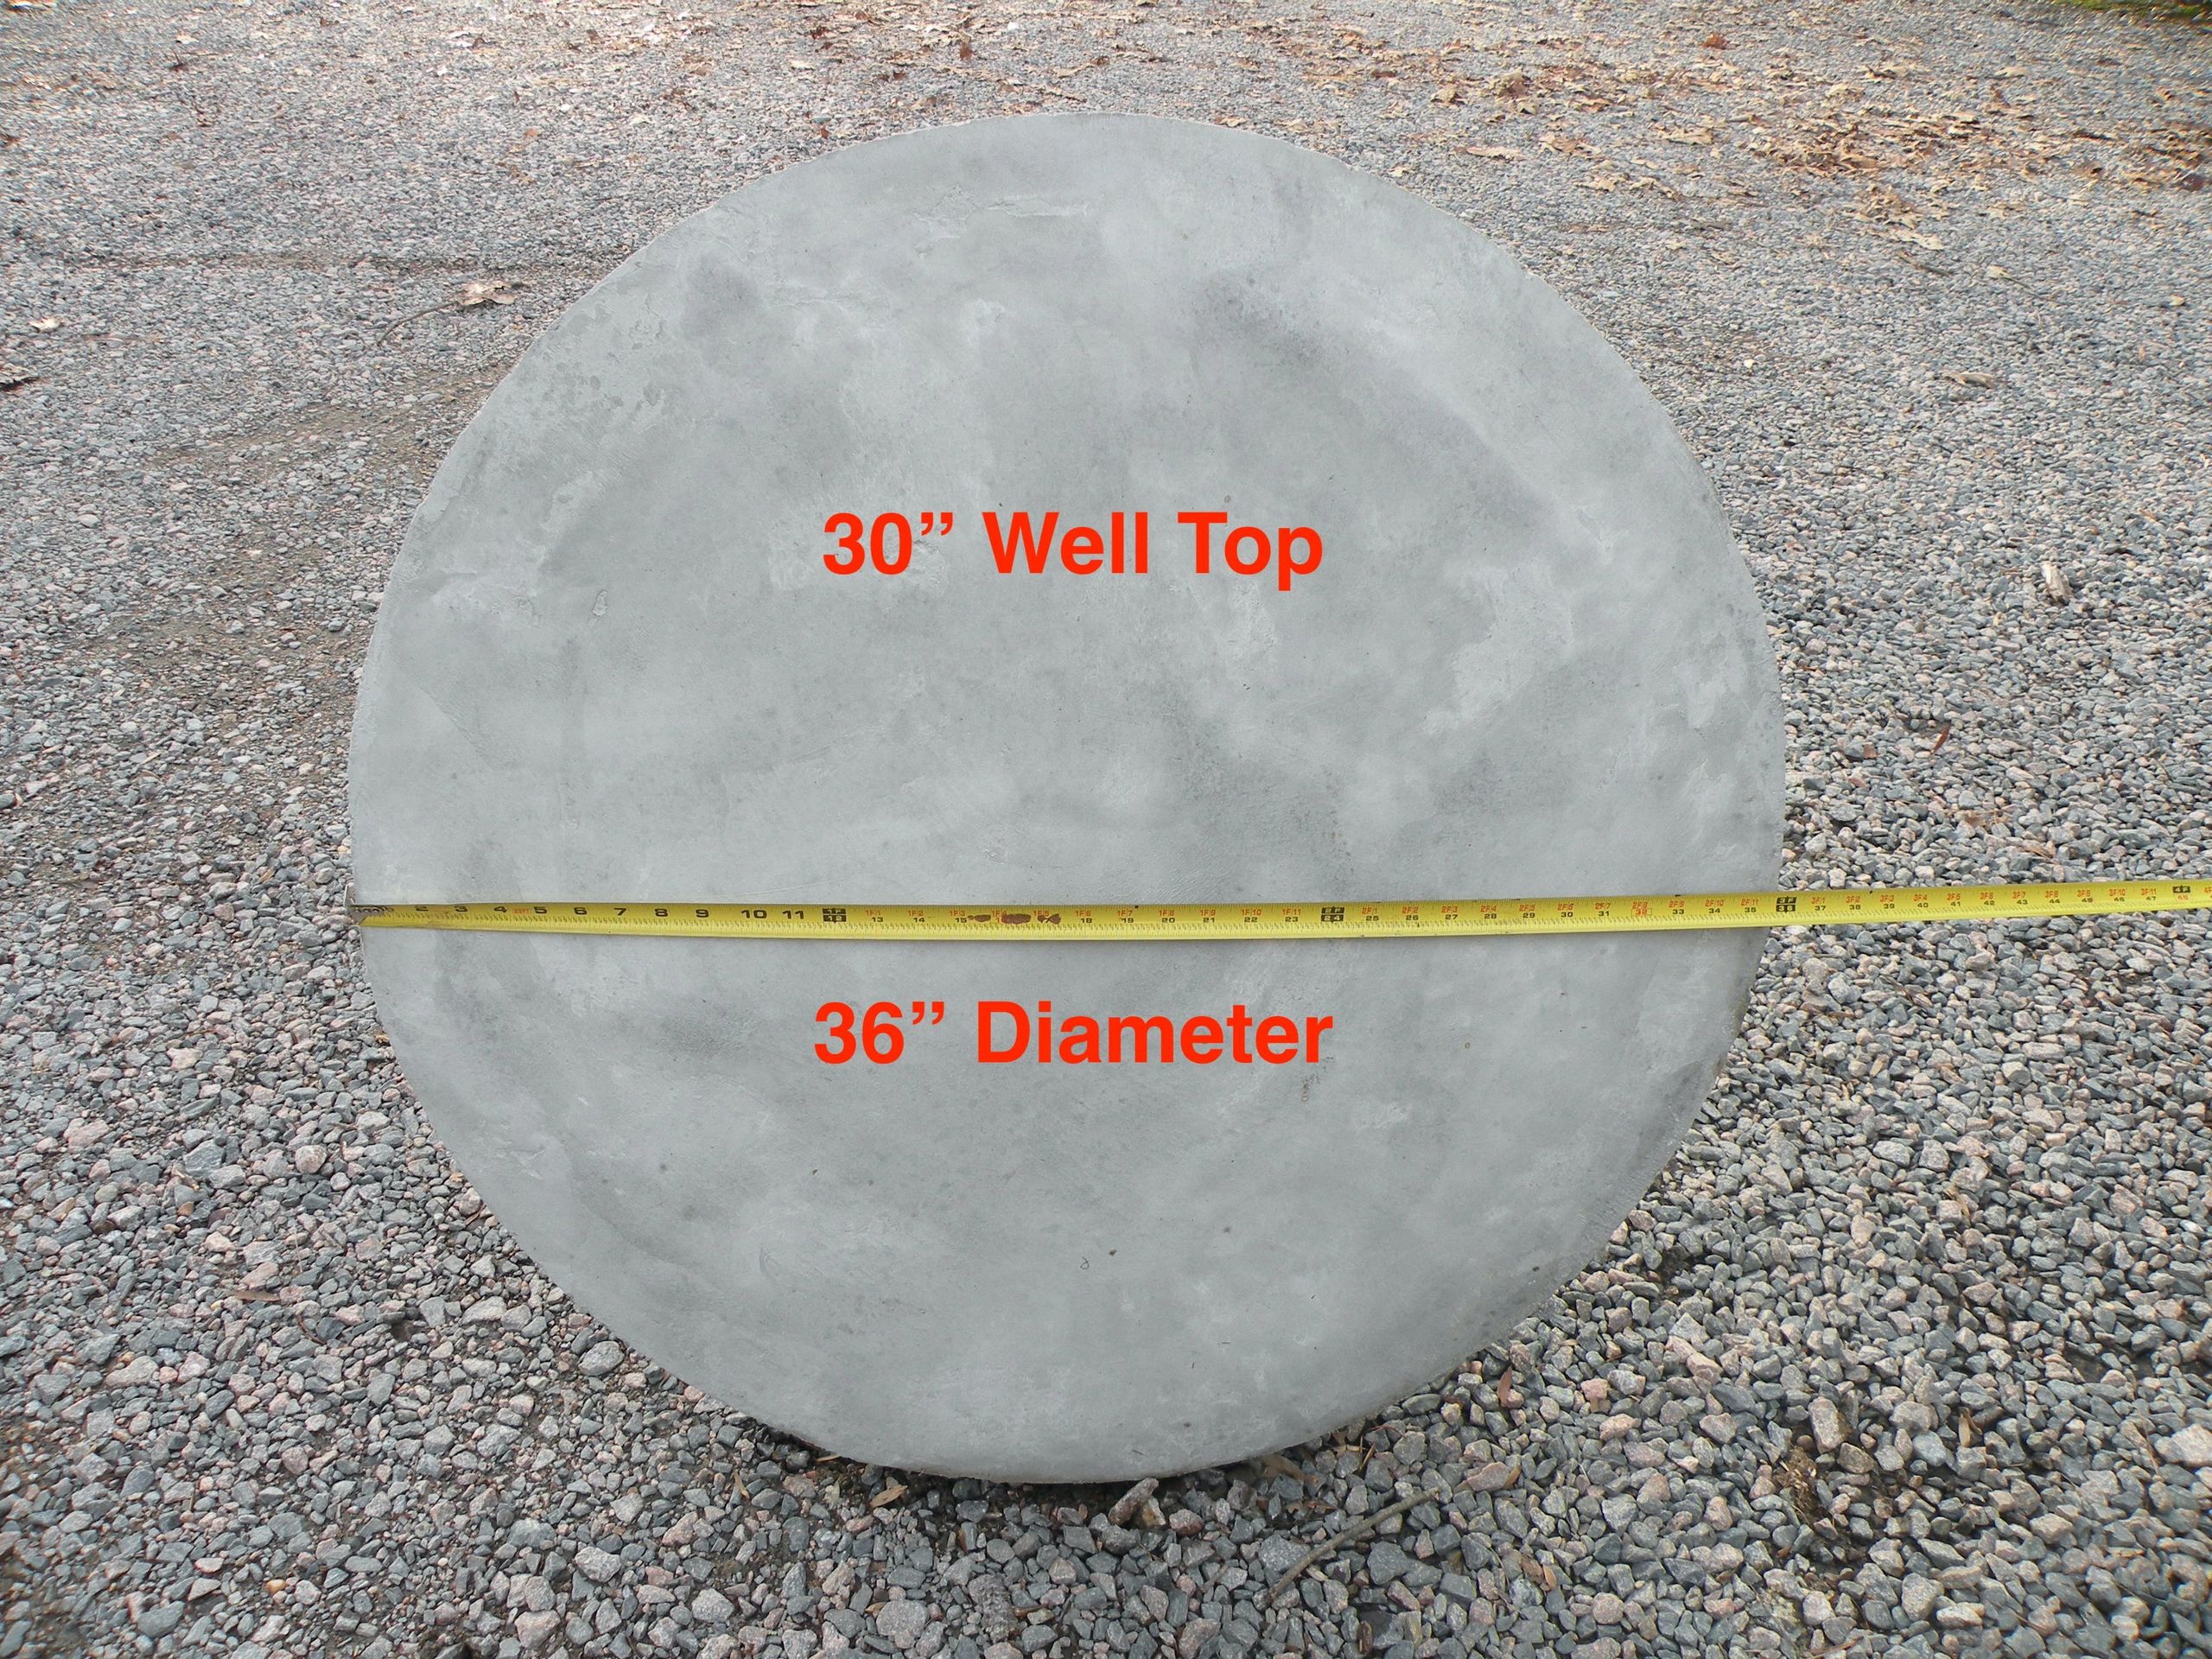 30" Well Top